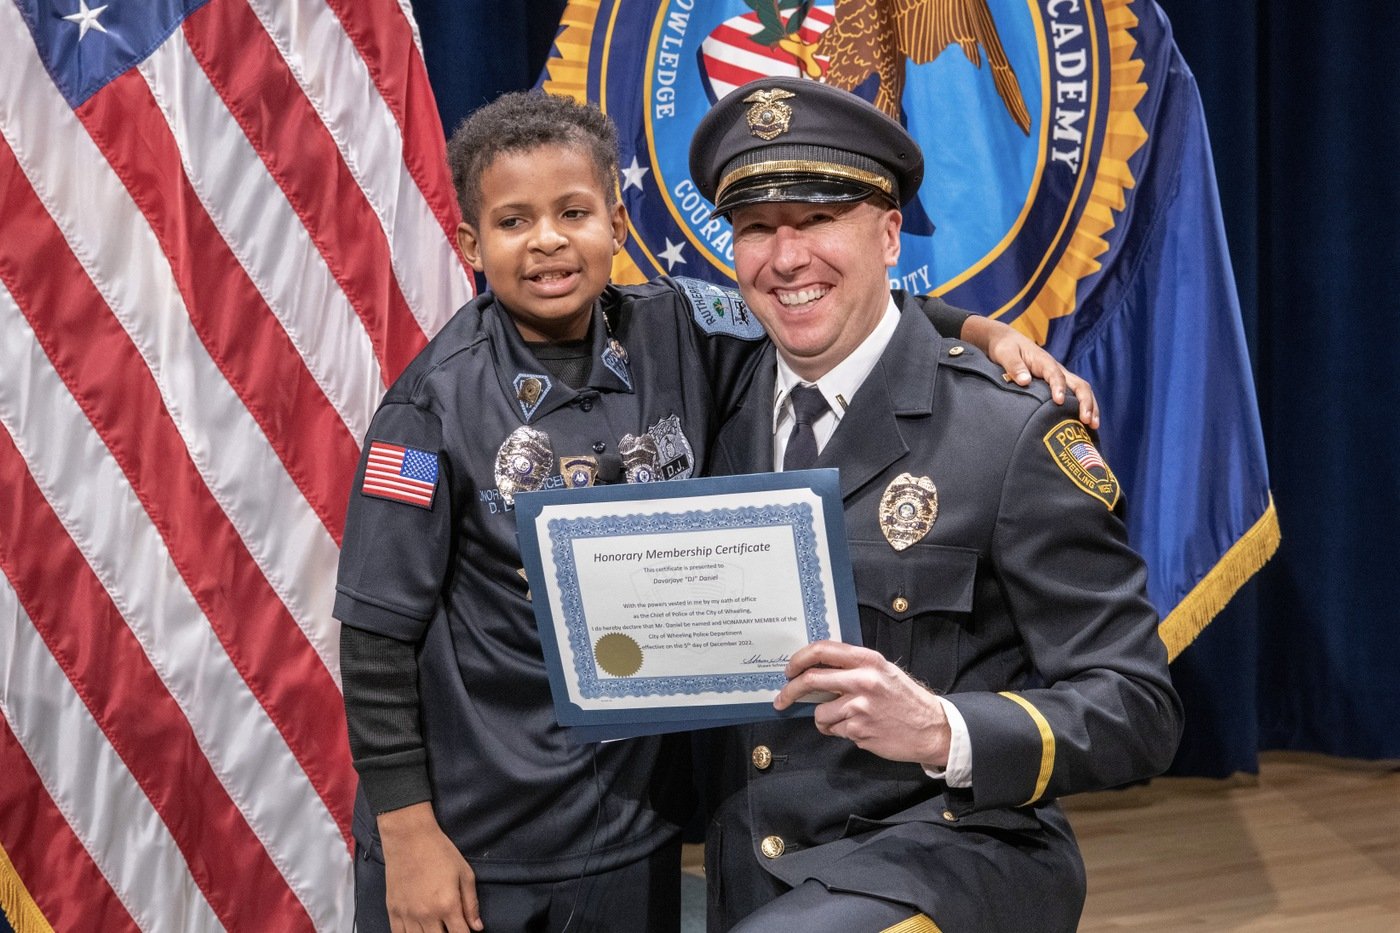 Executives from more than 50 law enforcement agencies helped DJ Daniel move toward a goal of being sworn in as an honorary member of 758 departments.